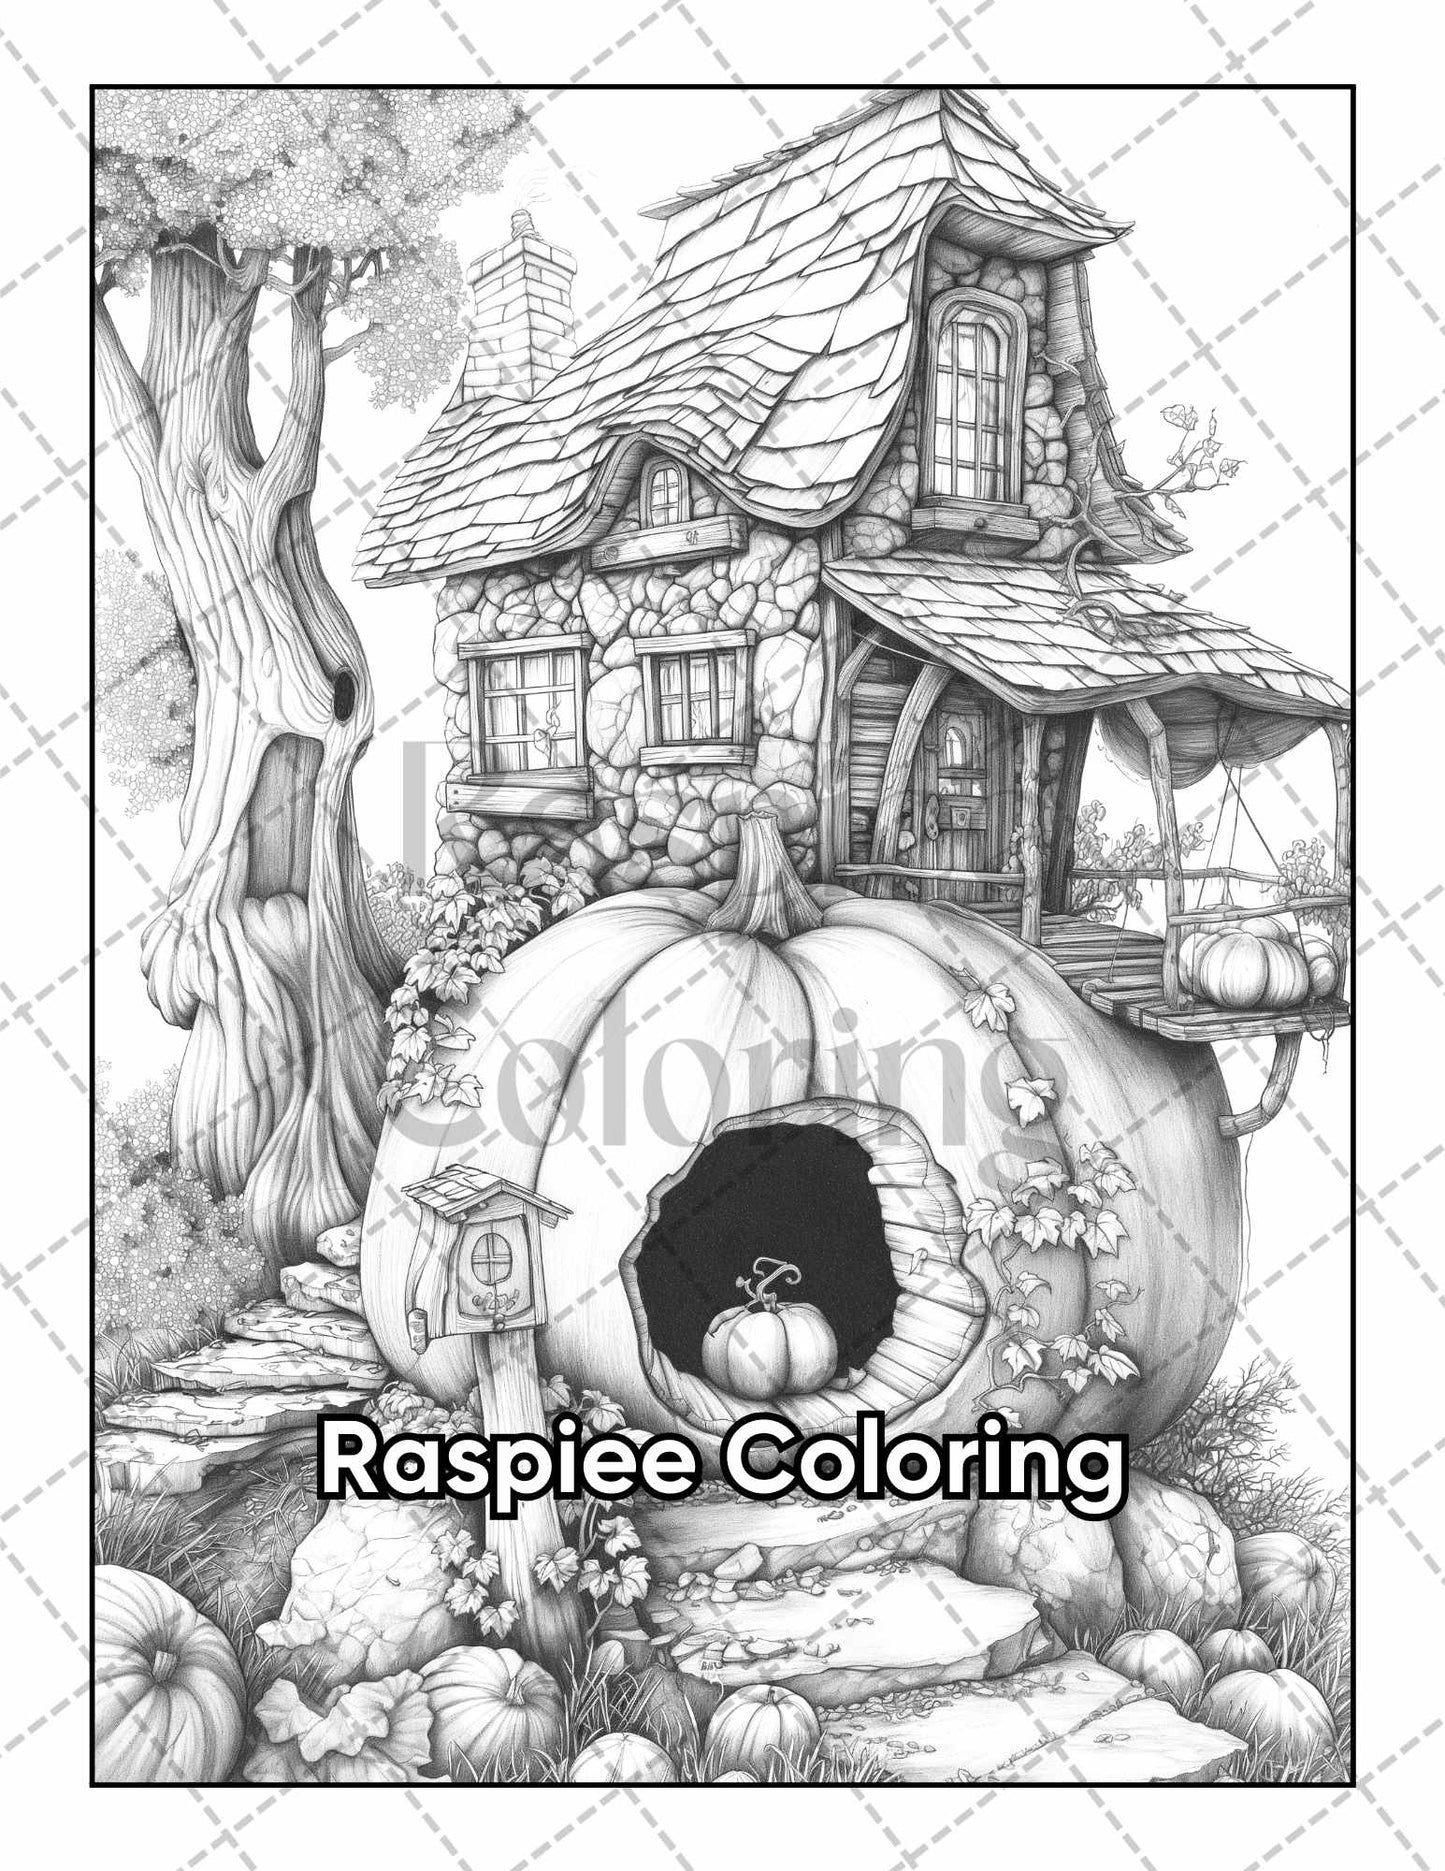 50 Fantasy Fairy Houses Adult Coloring Pages Printable PDF Instant Download